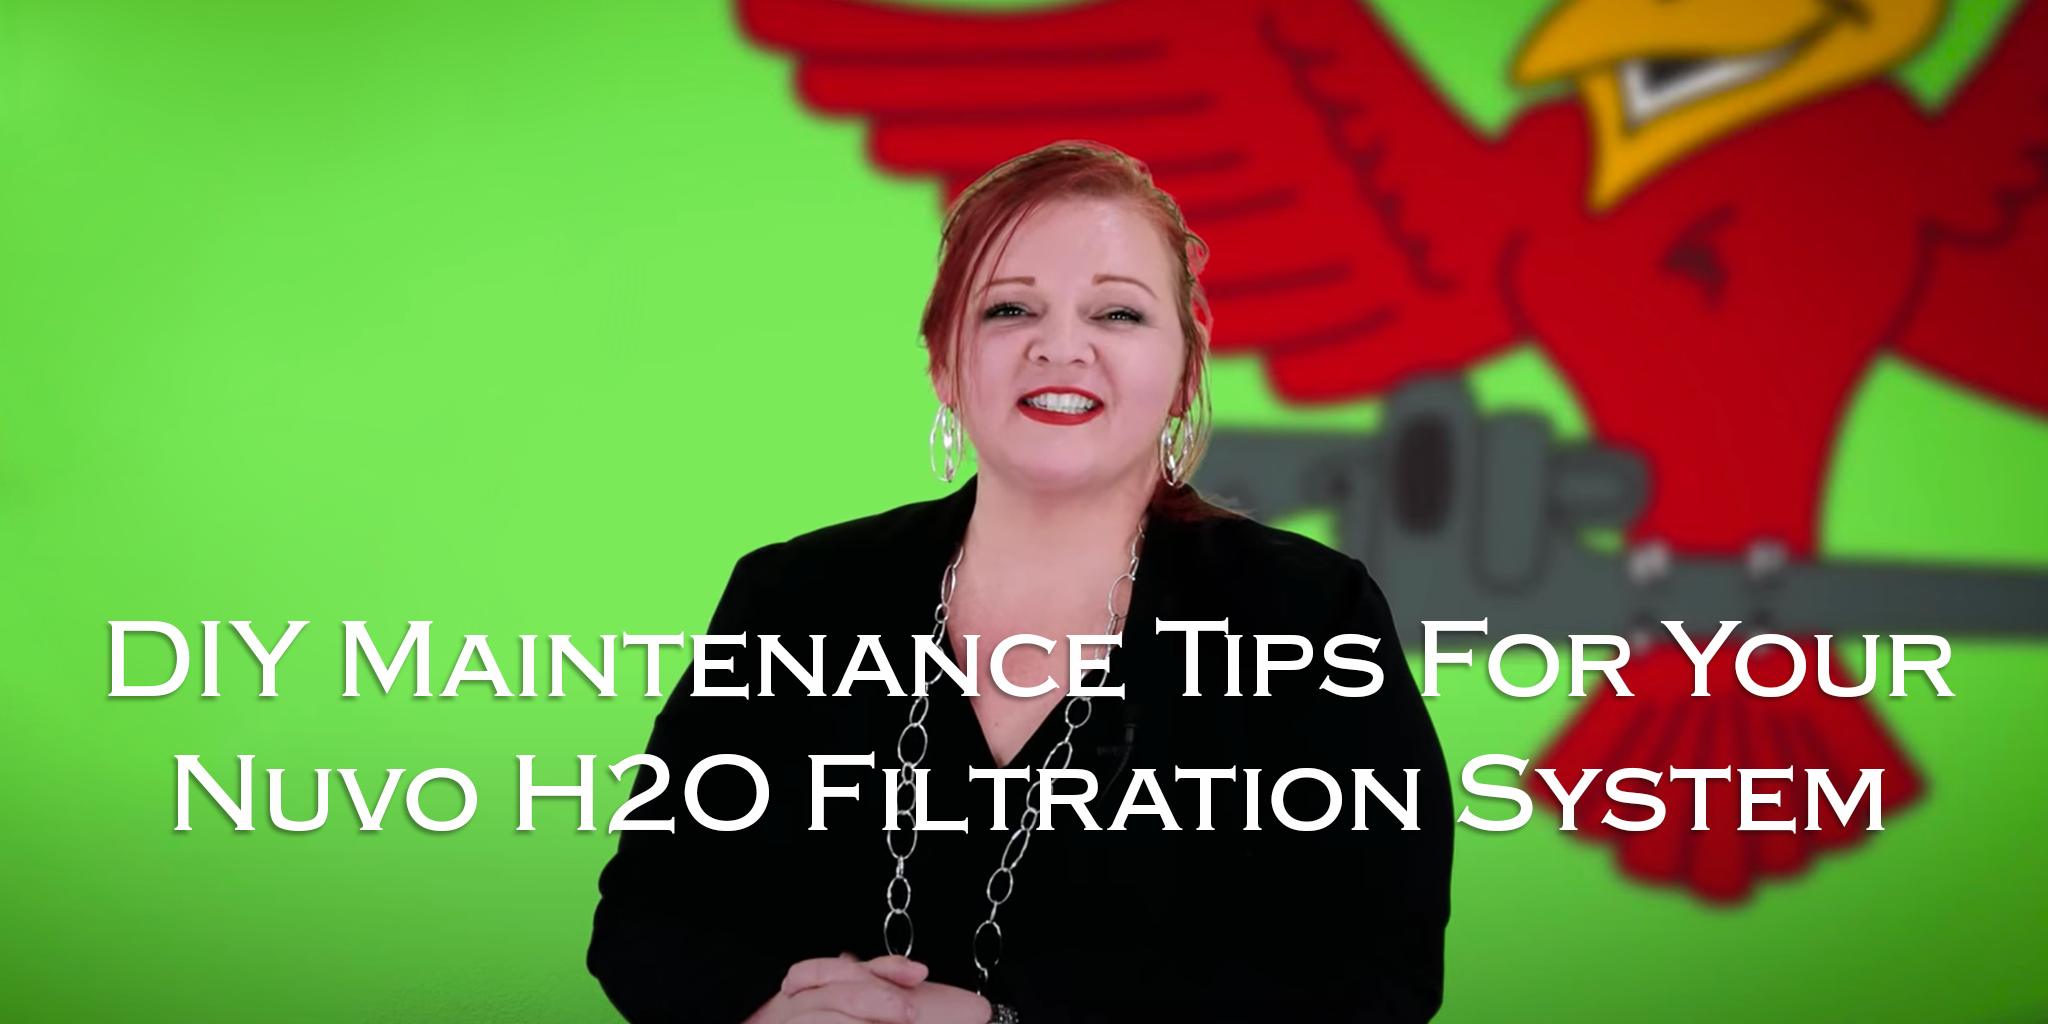 DIY-maintenance-tips-for-your-nuvo-h2o-filtration-system